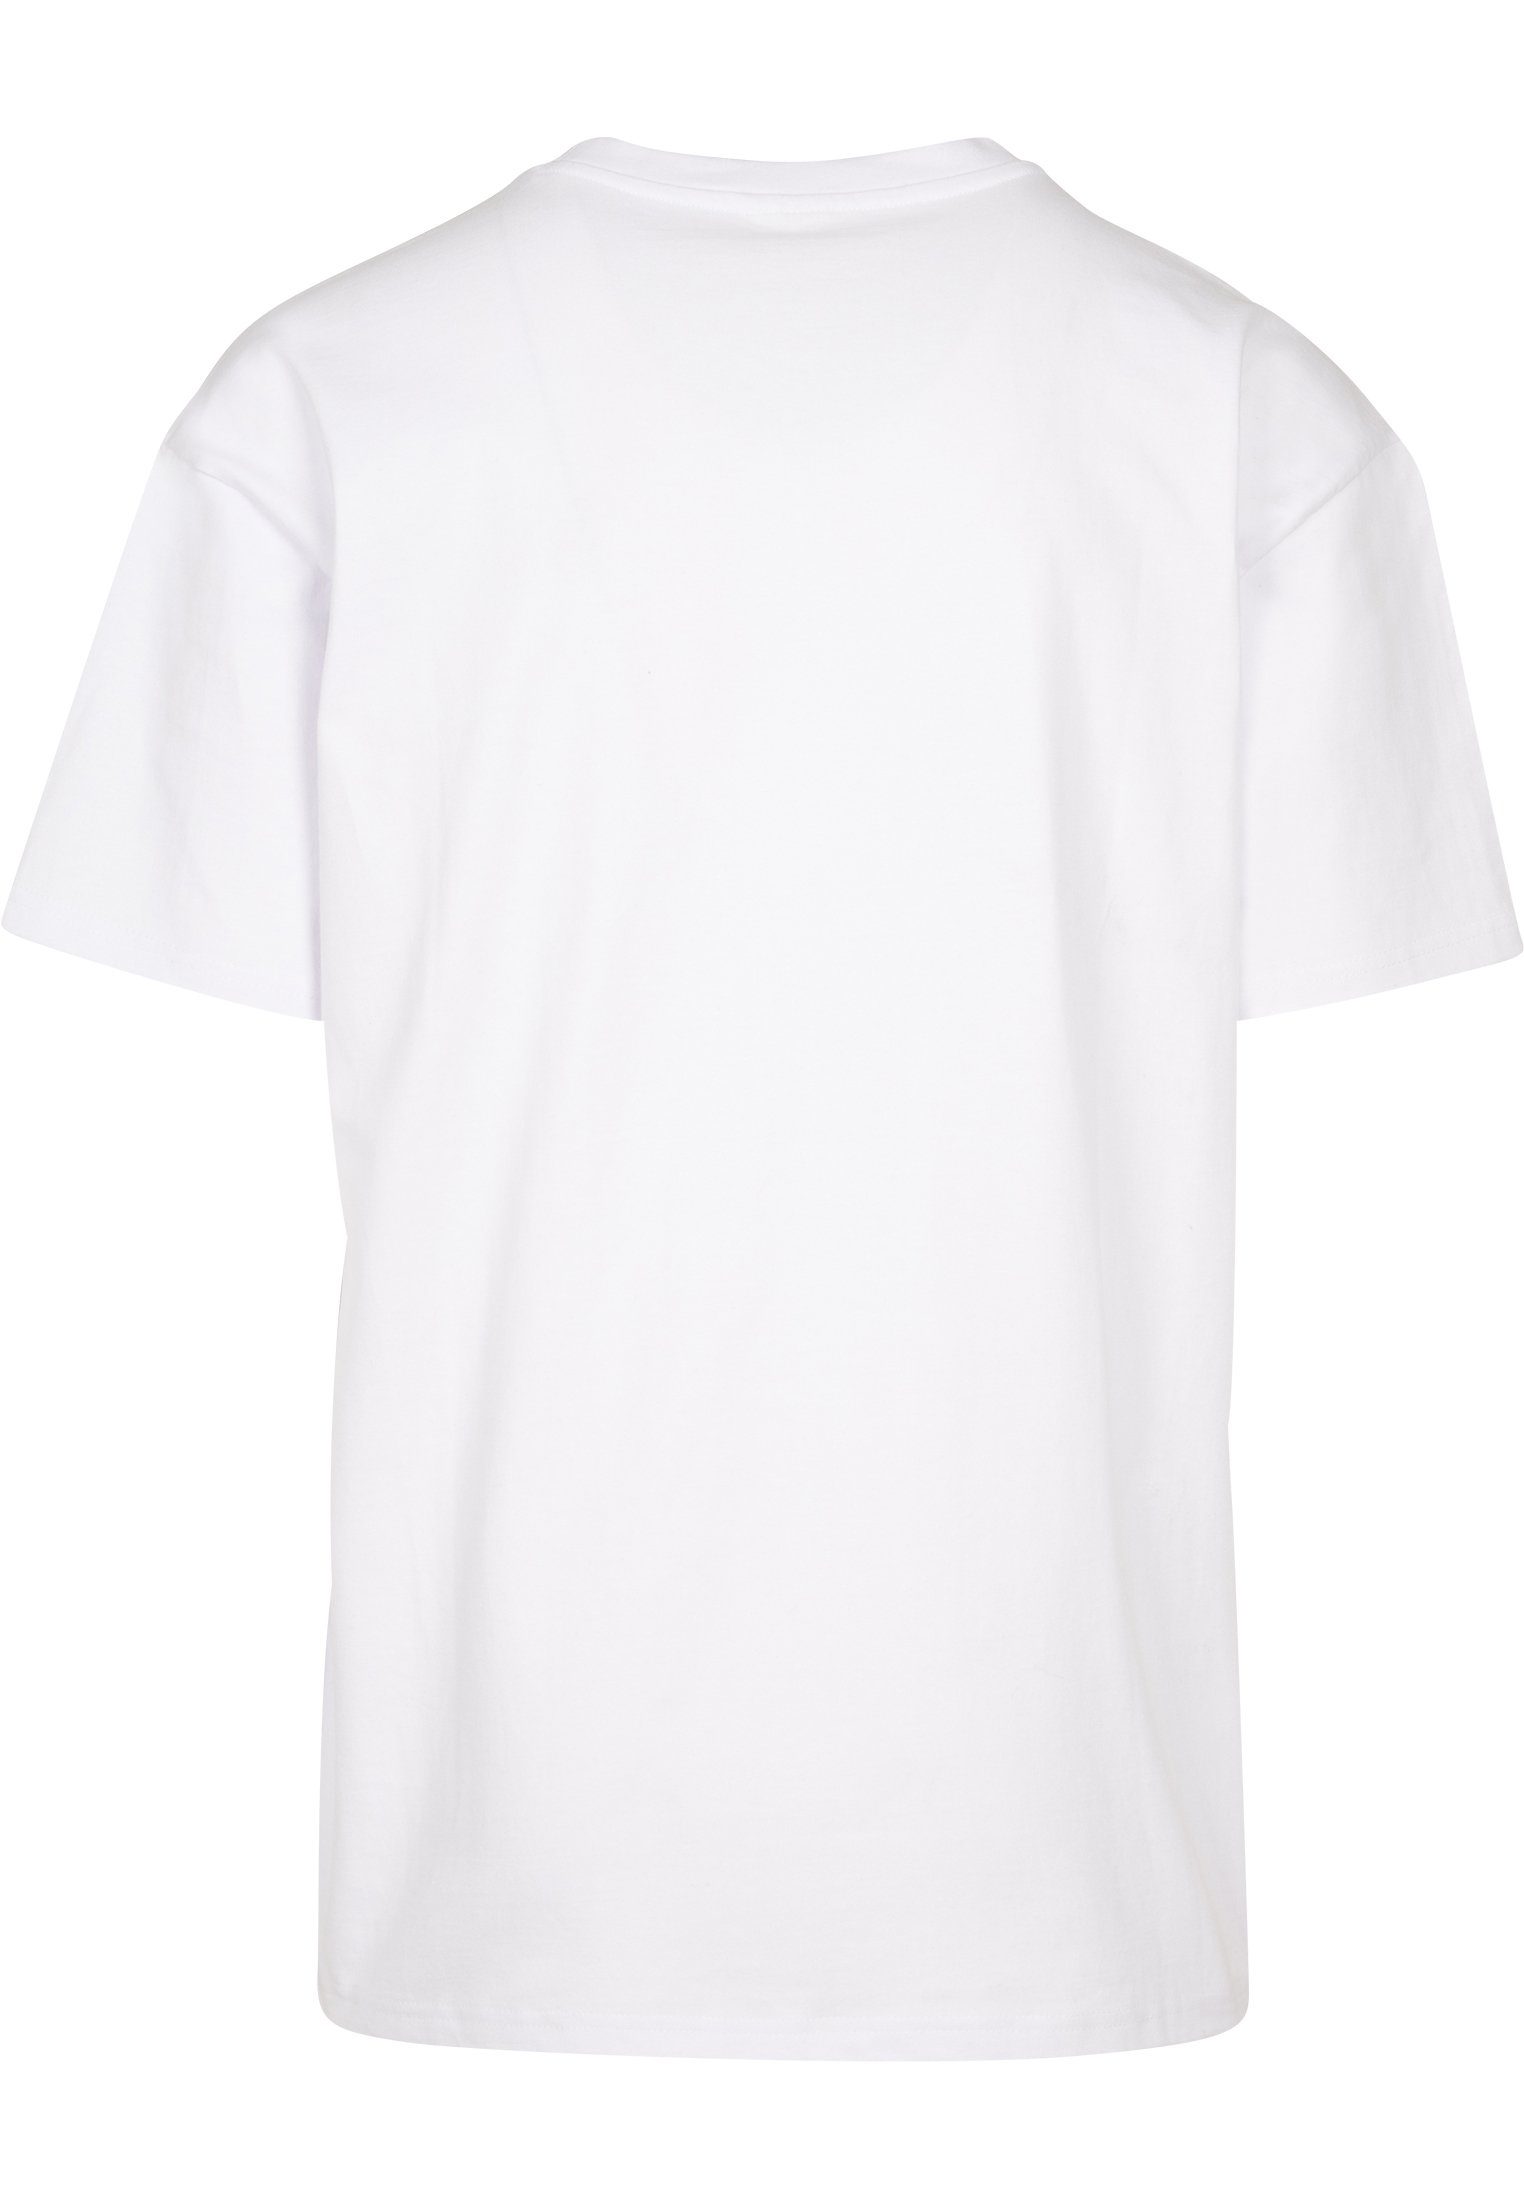 Kurzarmshirt Upscale white Phases Accessoires Tee Mister by Tee Moon (1-tlg)